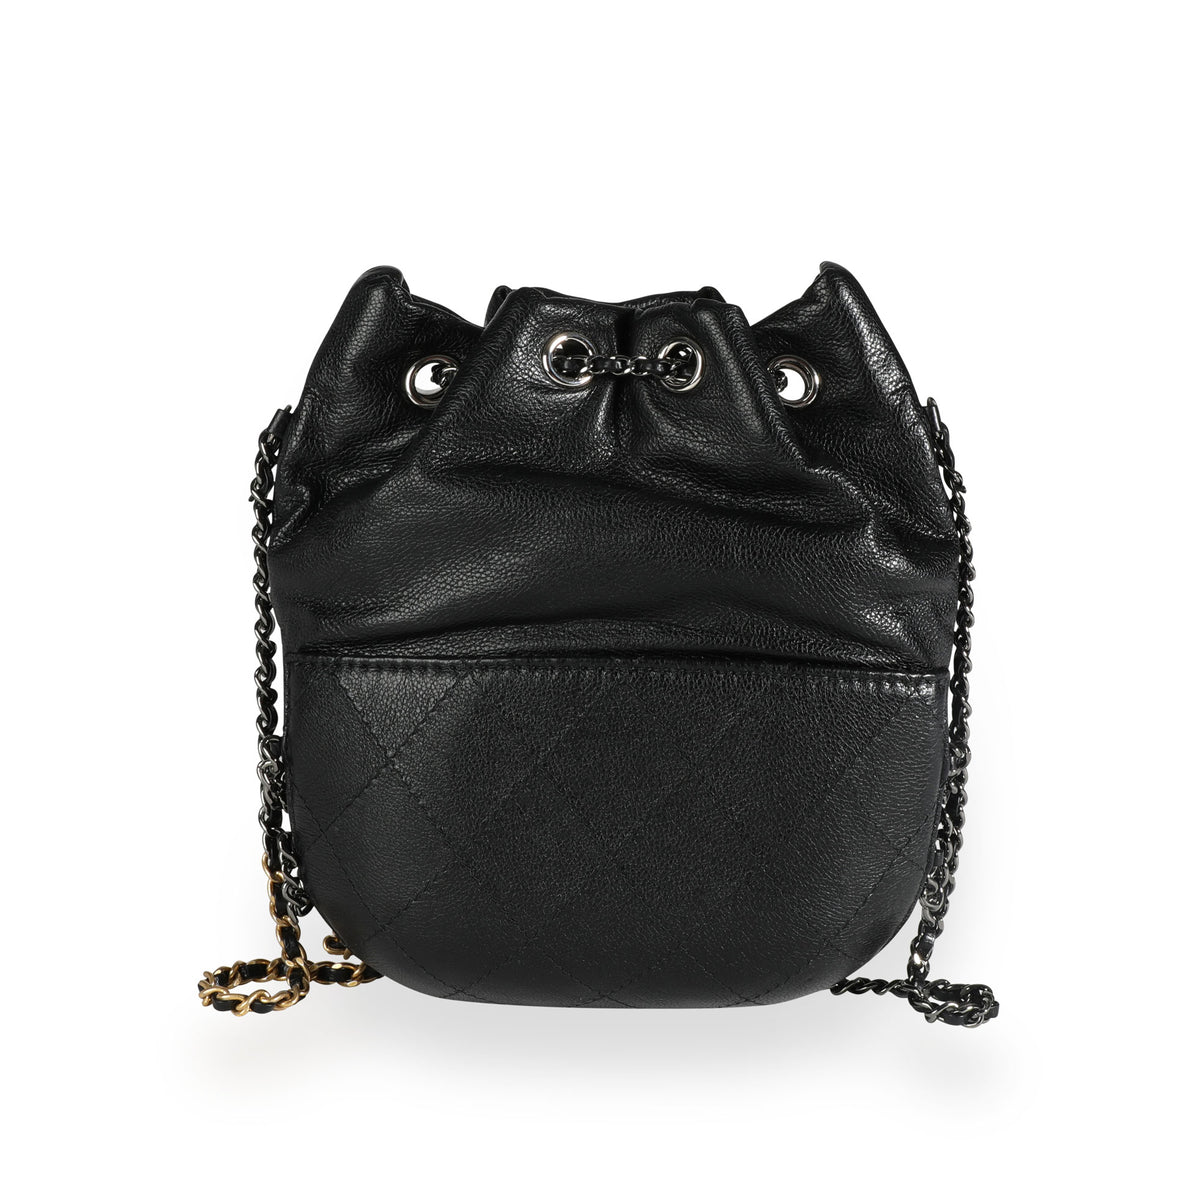 Chanel Gabrielle Gabby Small Drawstring Bucket Bag Backpack - SOLD